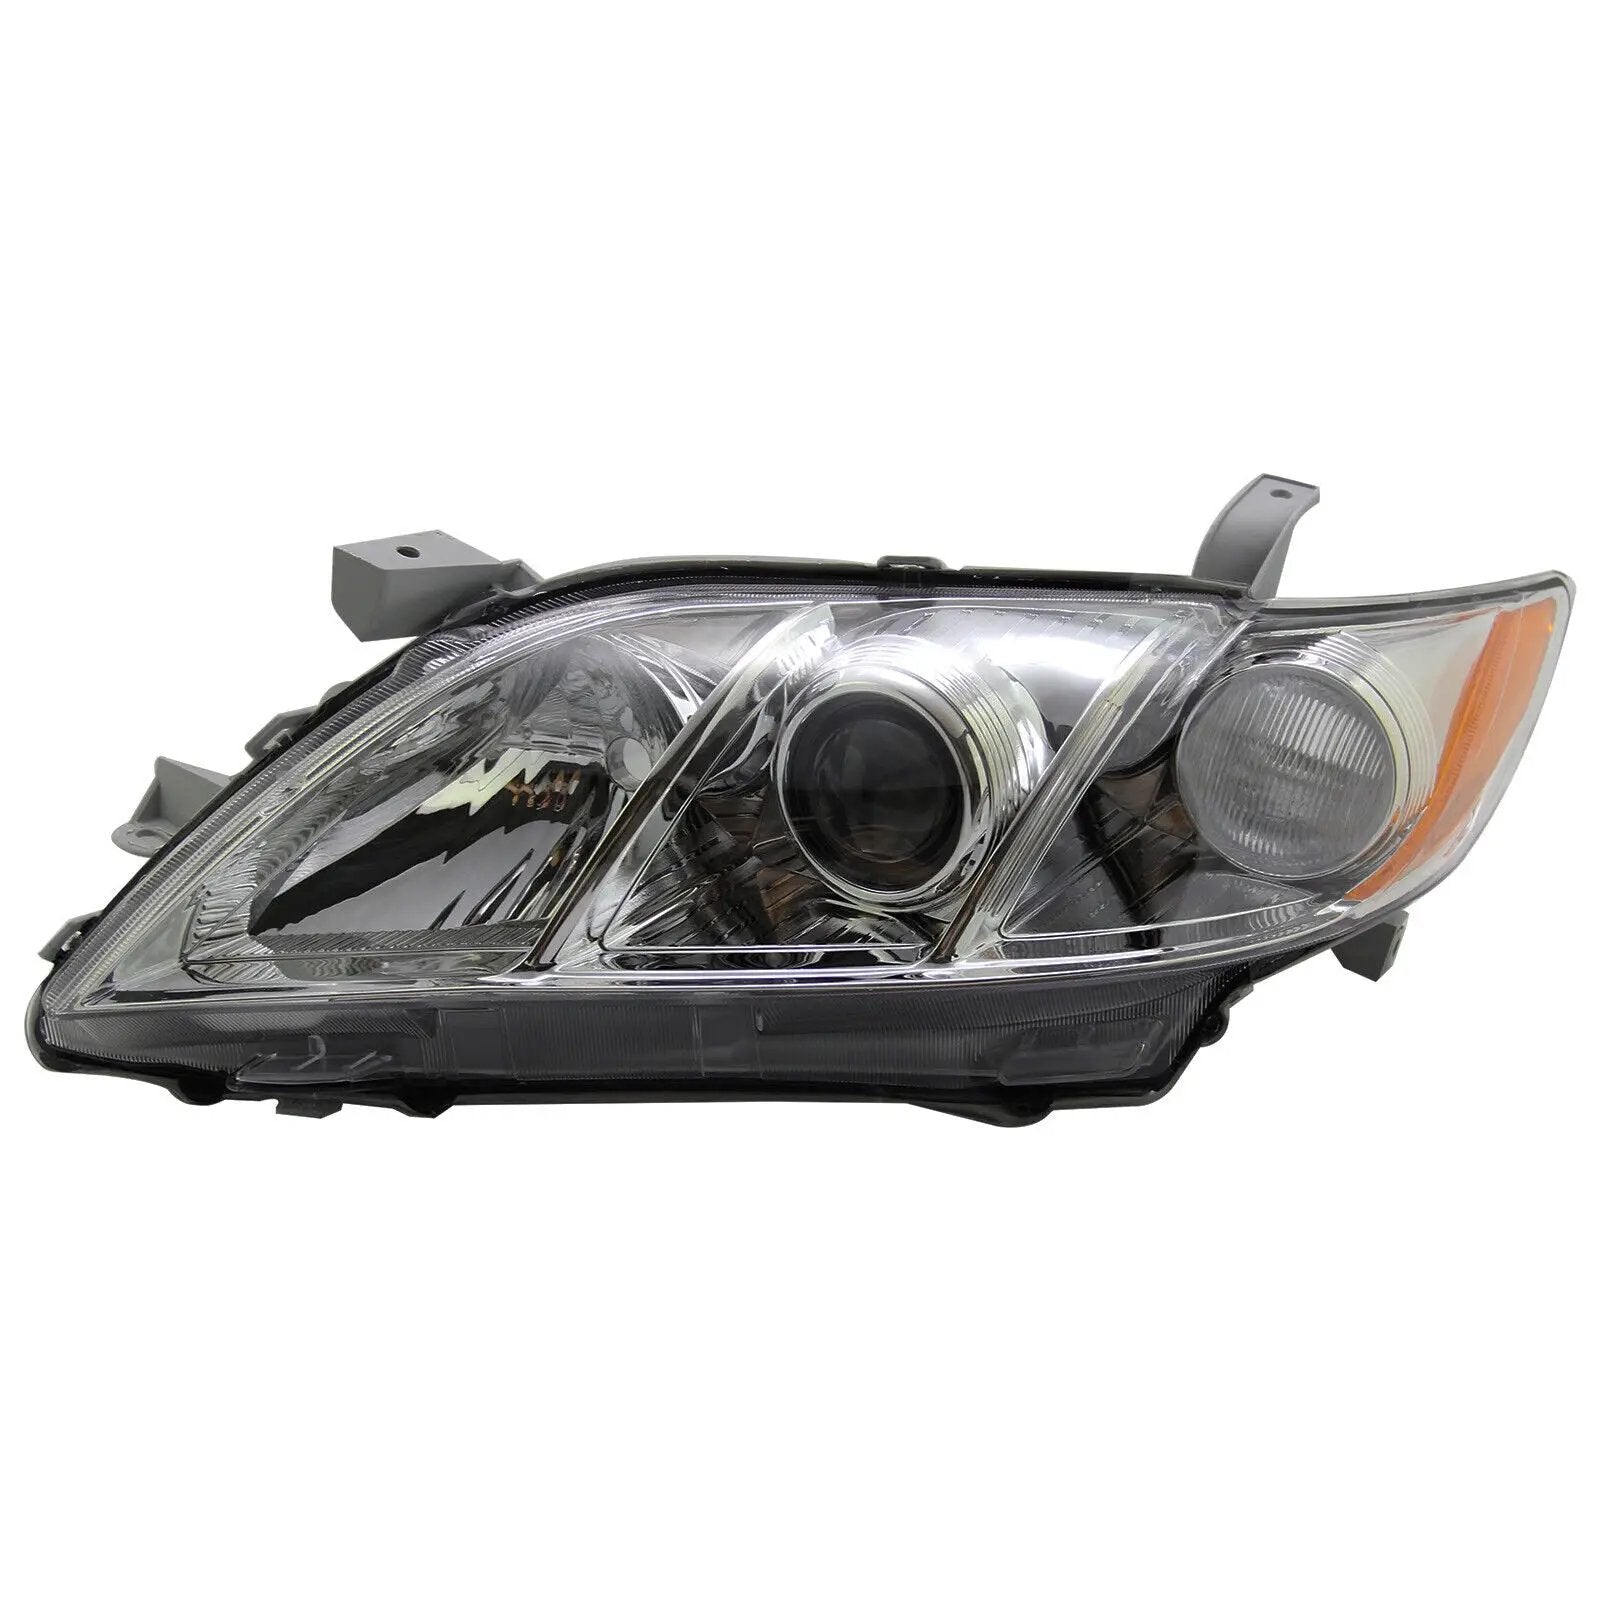 Chrome Headlights Headlamps Assembly for 07-09 Toyota Camry Left & Right